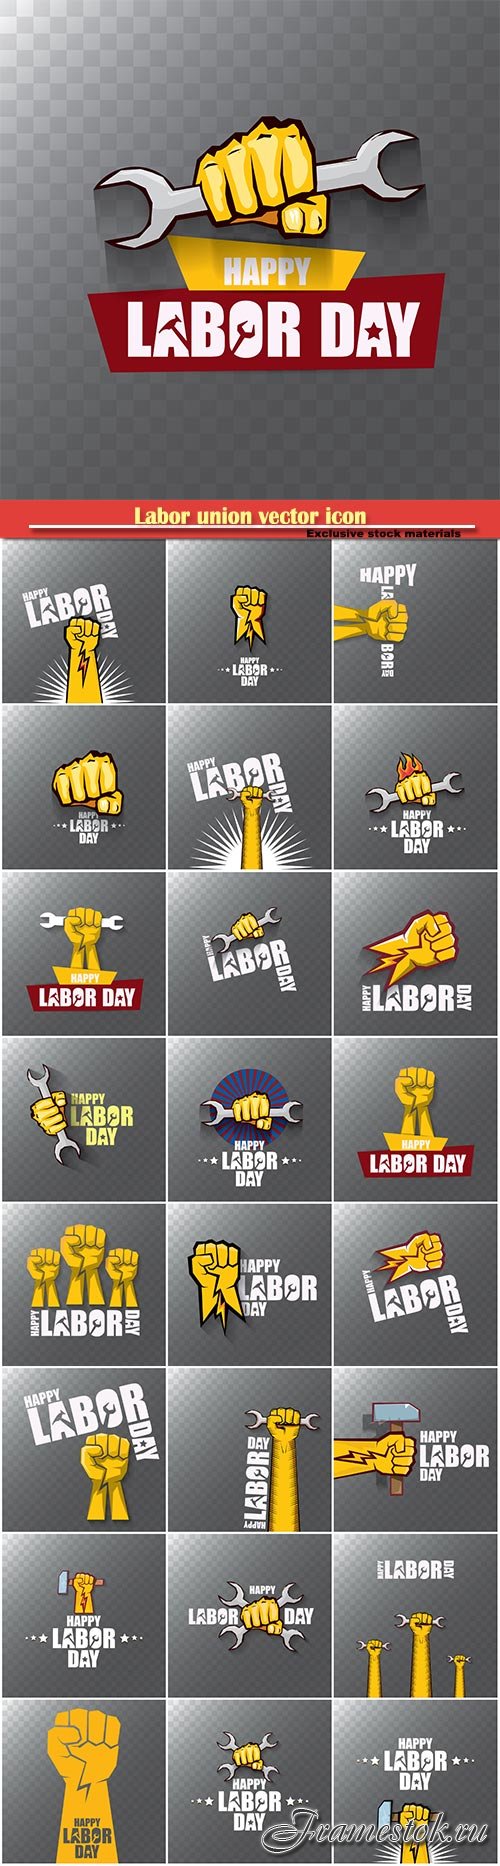 Labor union vector icon, banner with clenched fist isolated on transparent background